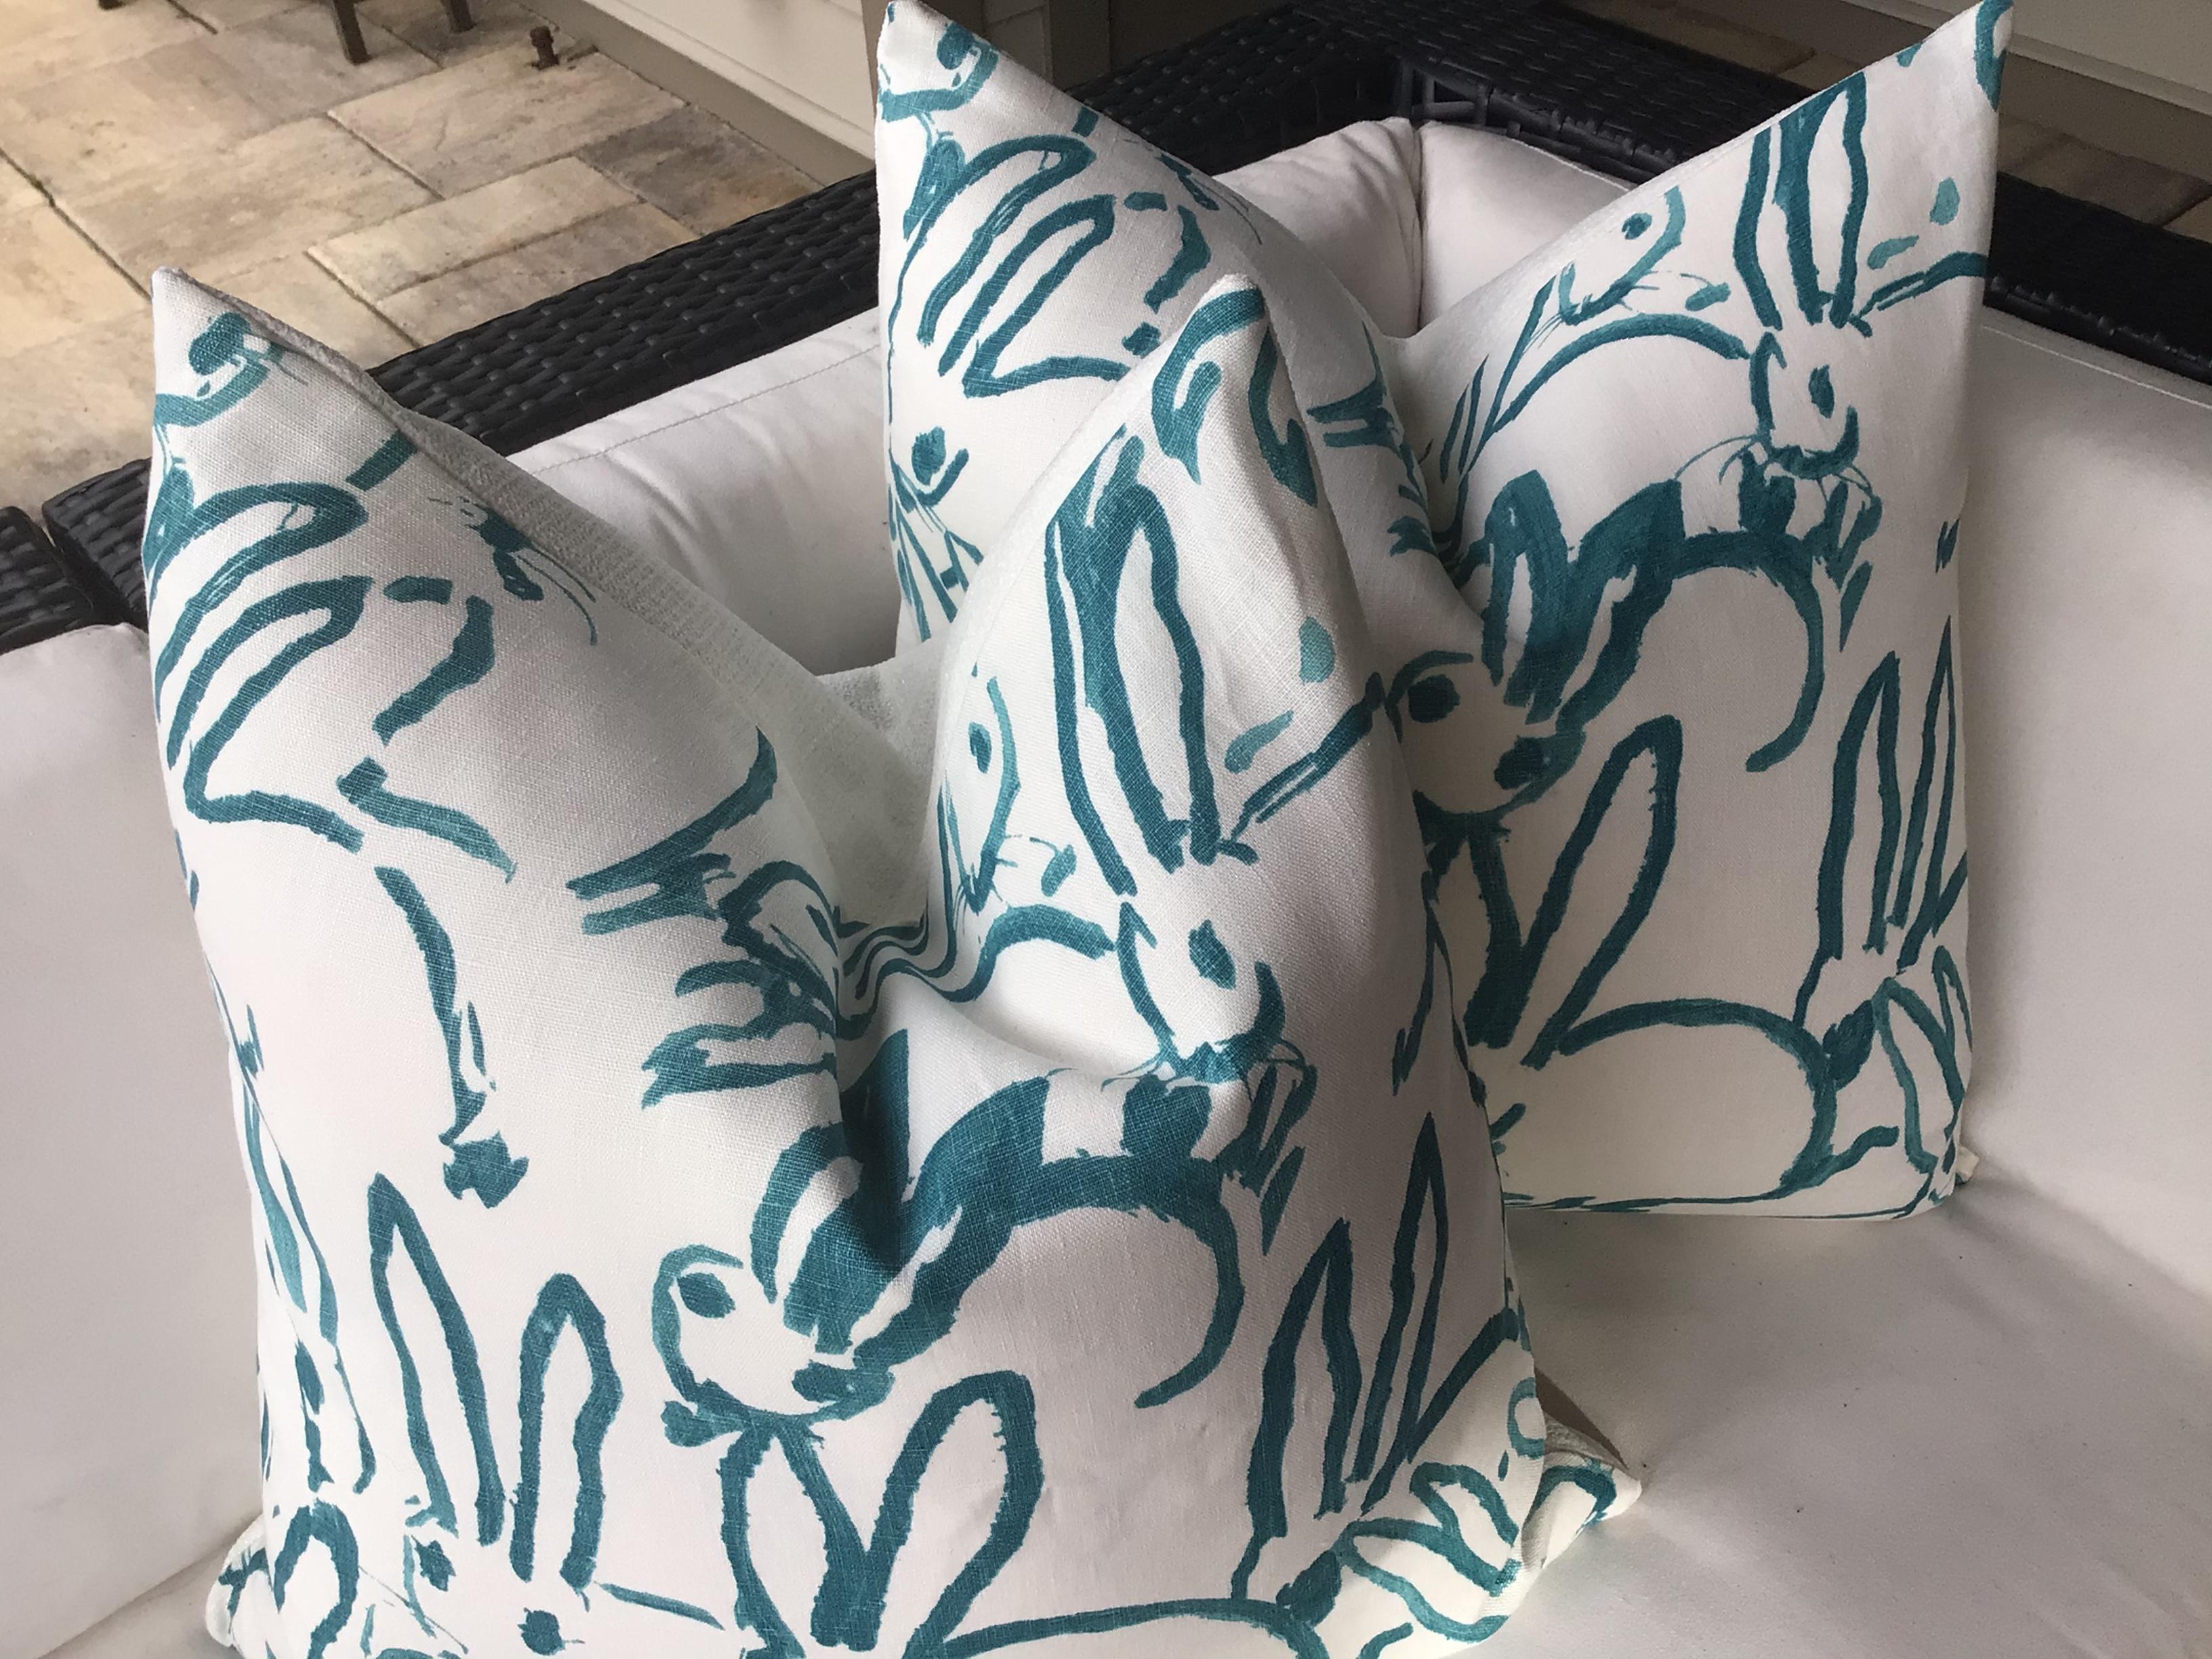 Hunt Slonen “Bunny Hutch” in Aqua 22” Down Filled Pillows - a Pair In New Condition For Sale In Winder, GA